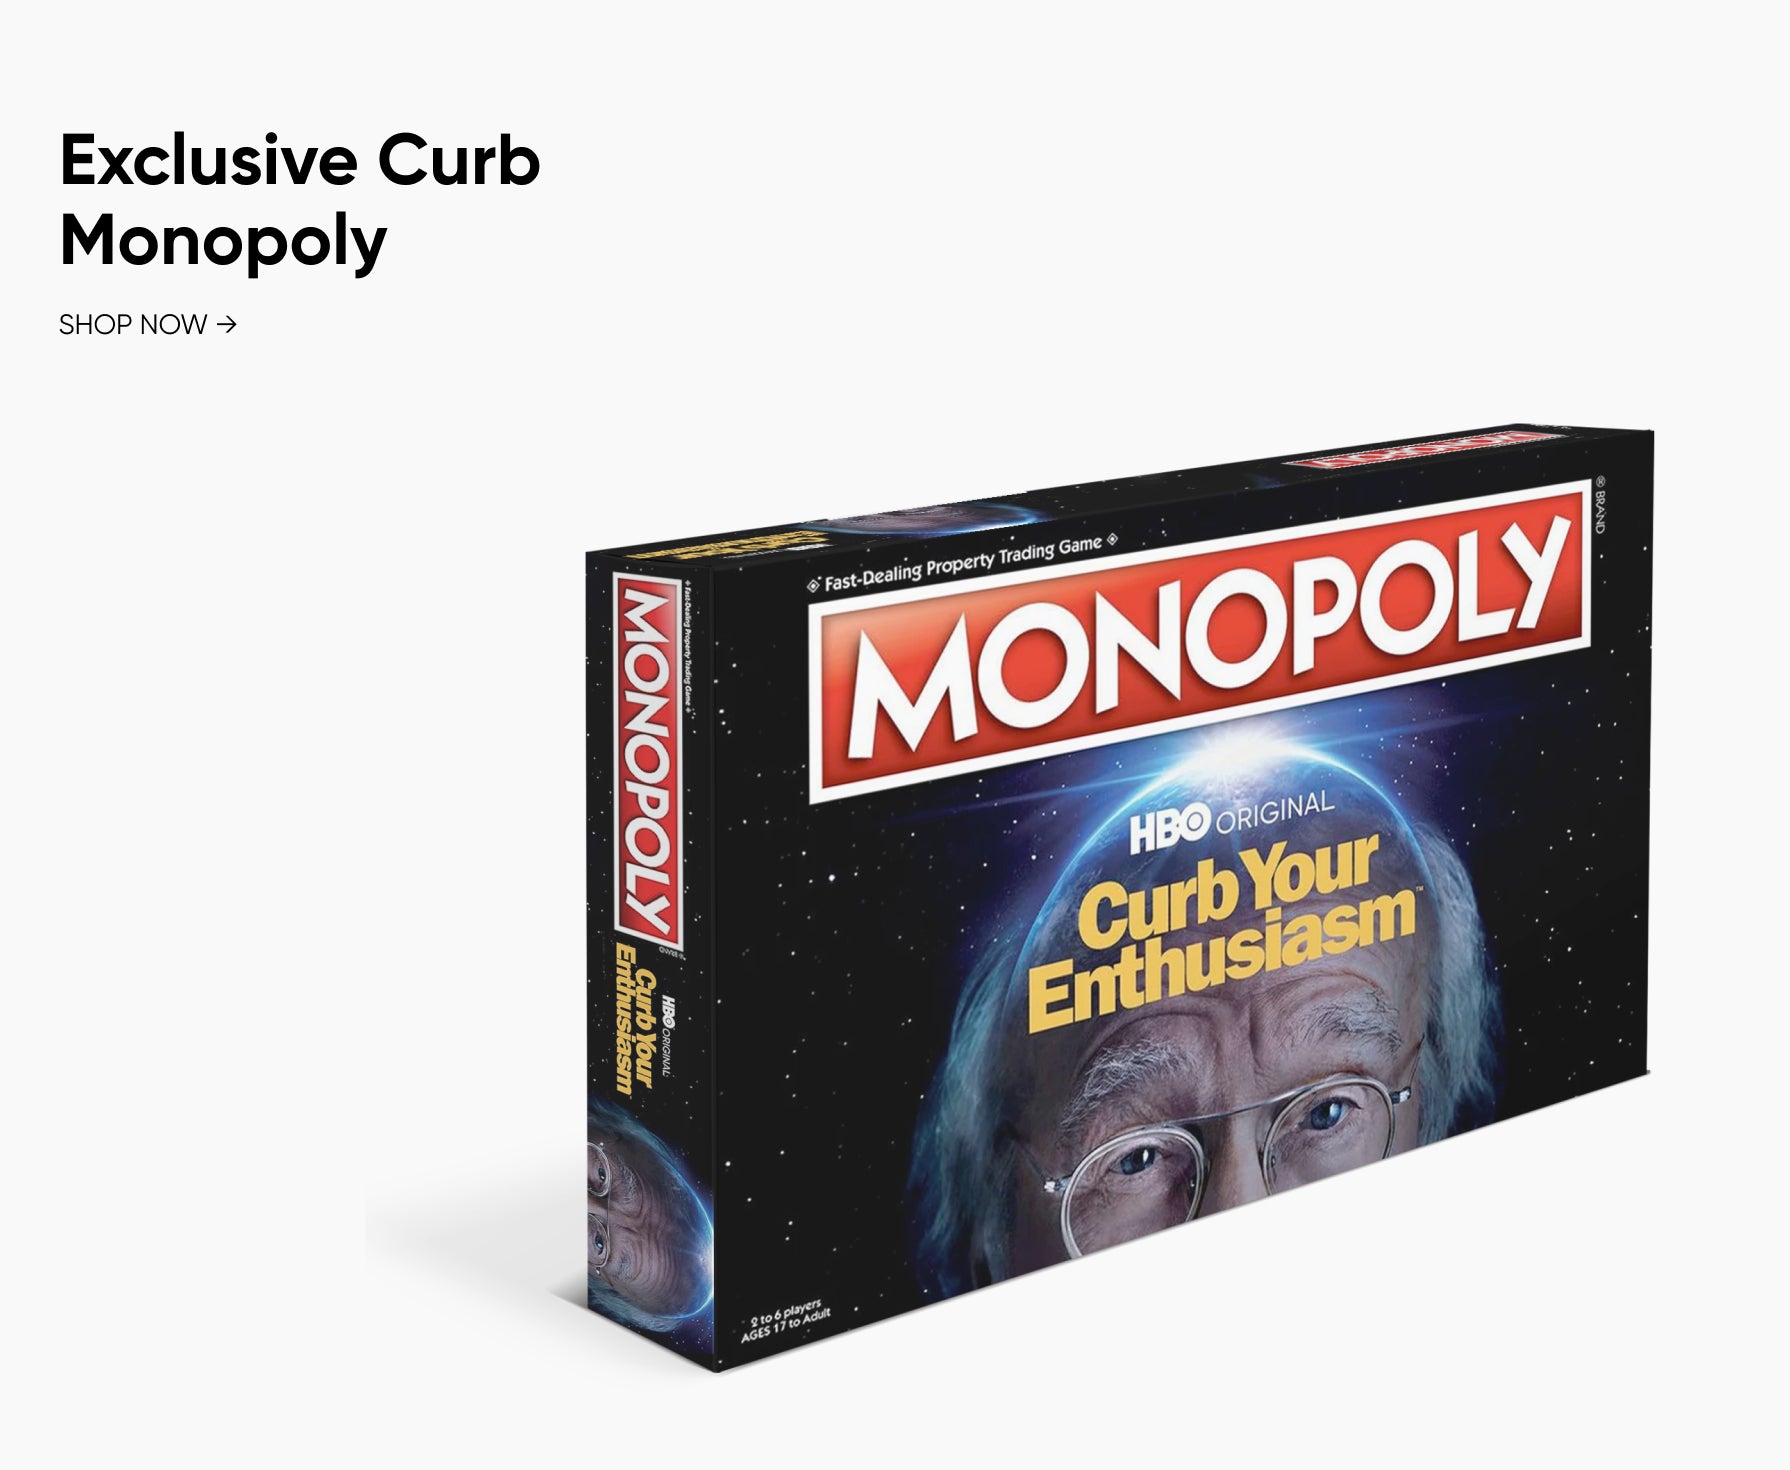 Exclusive Curb Your Enthusiasm Monopoly